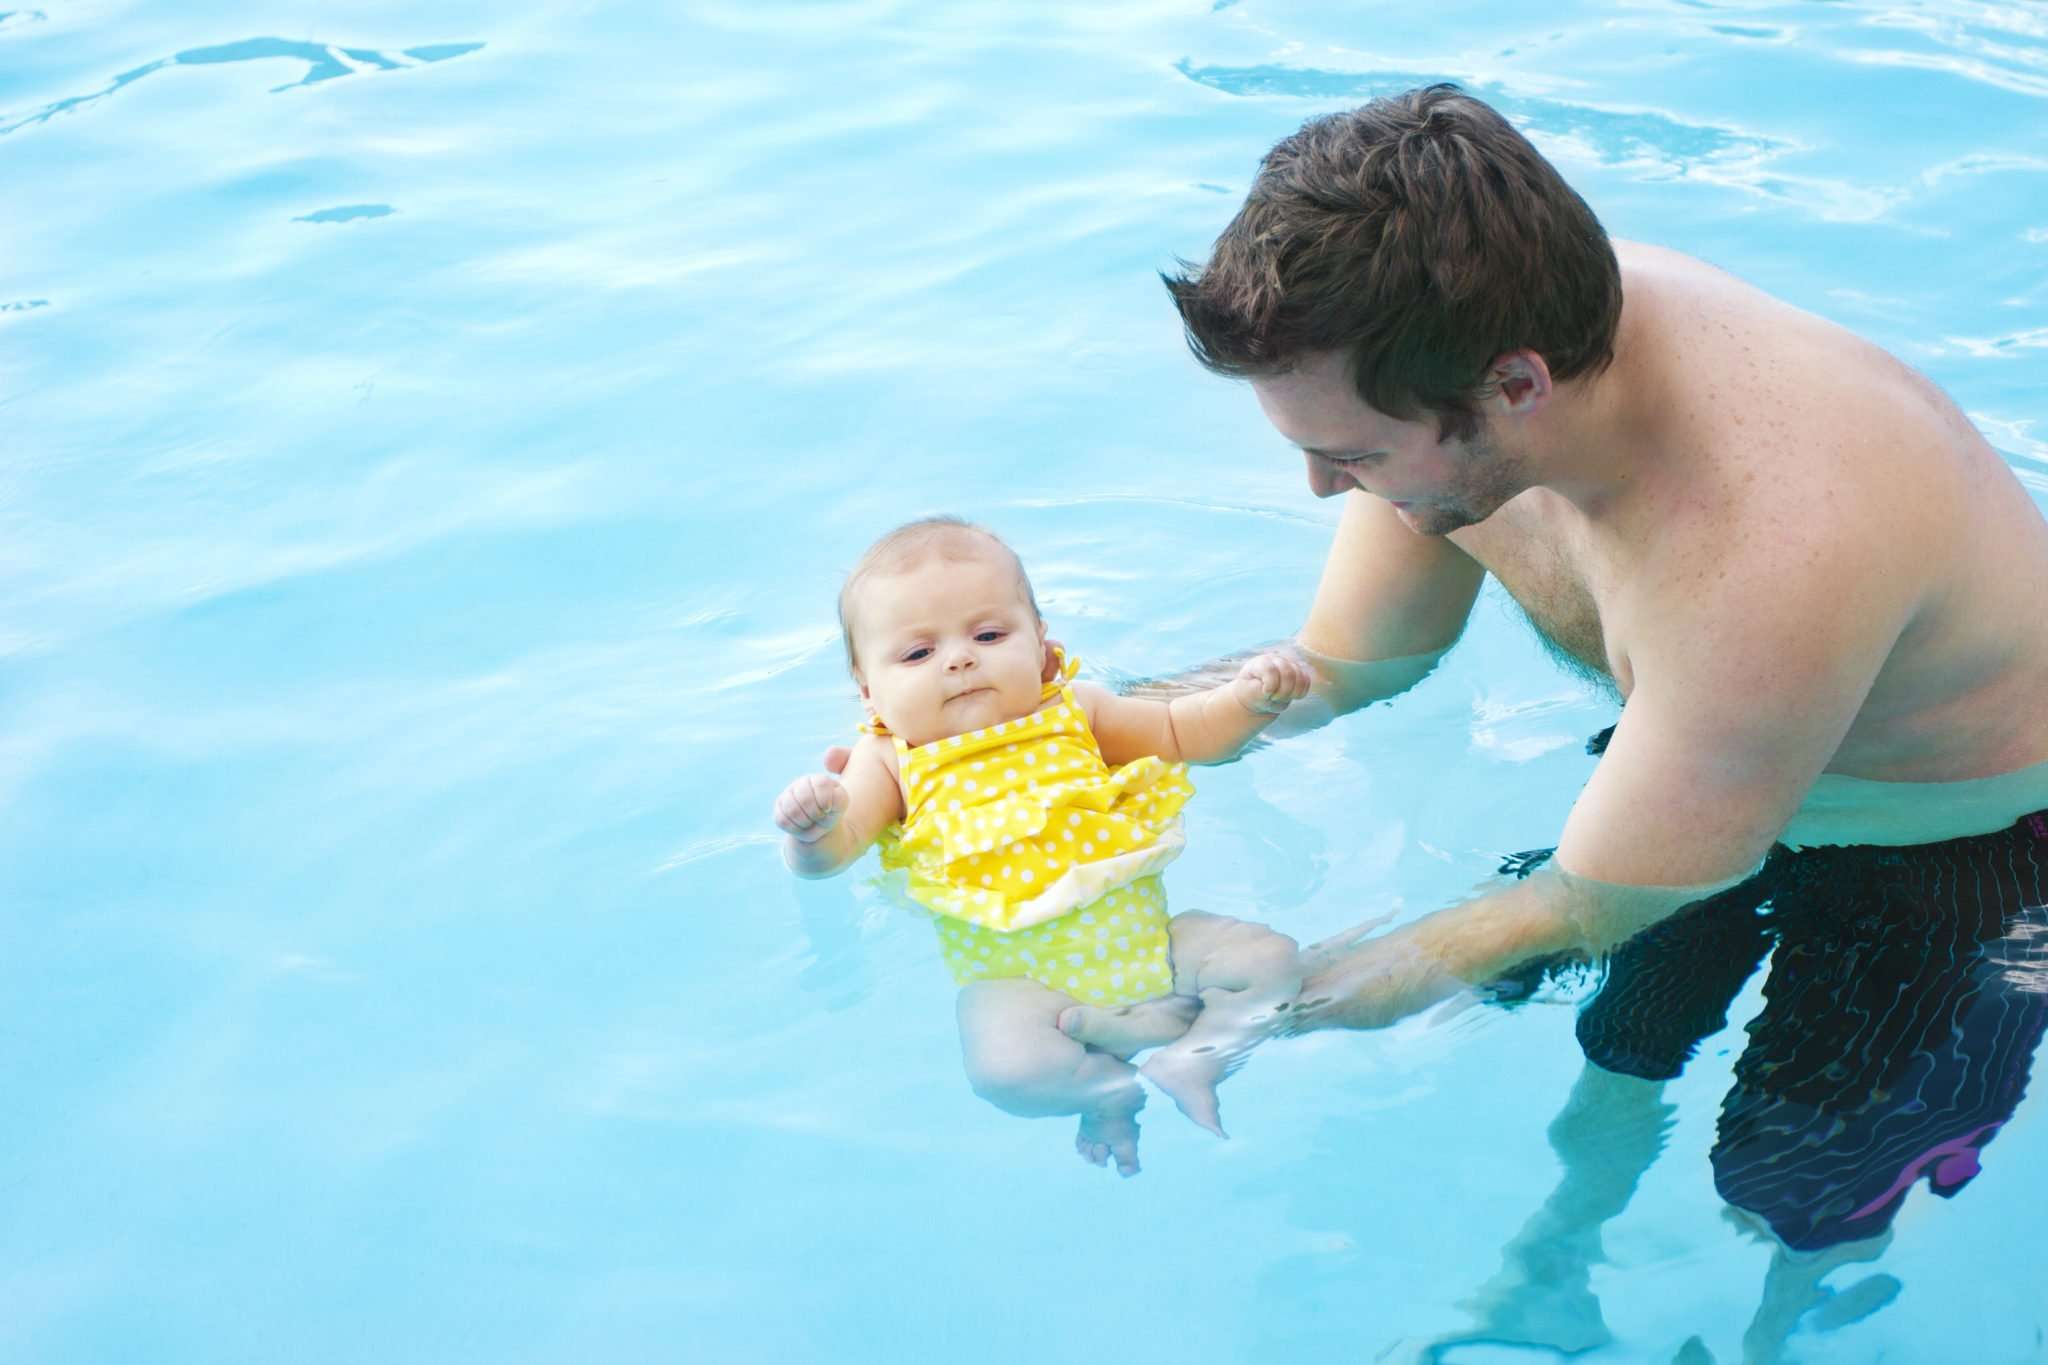 When Can Babies Go Swimming?